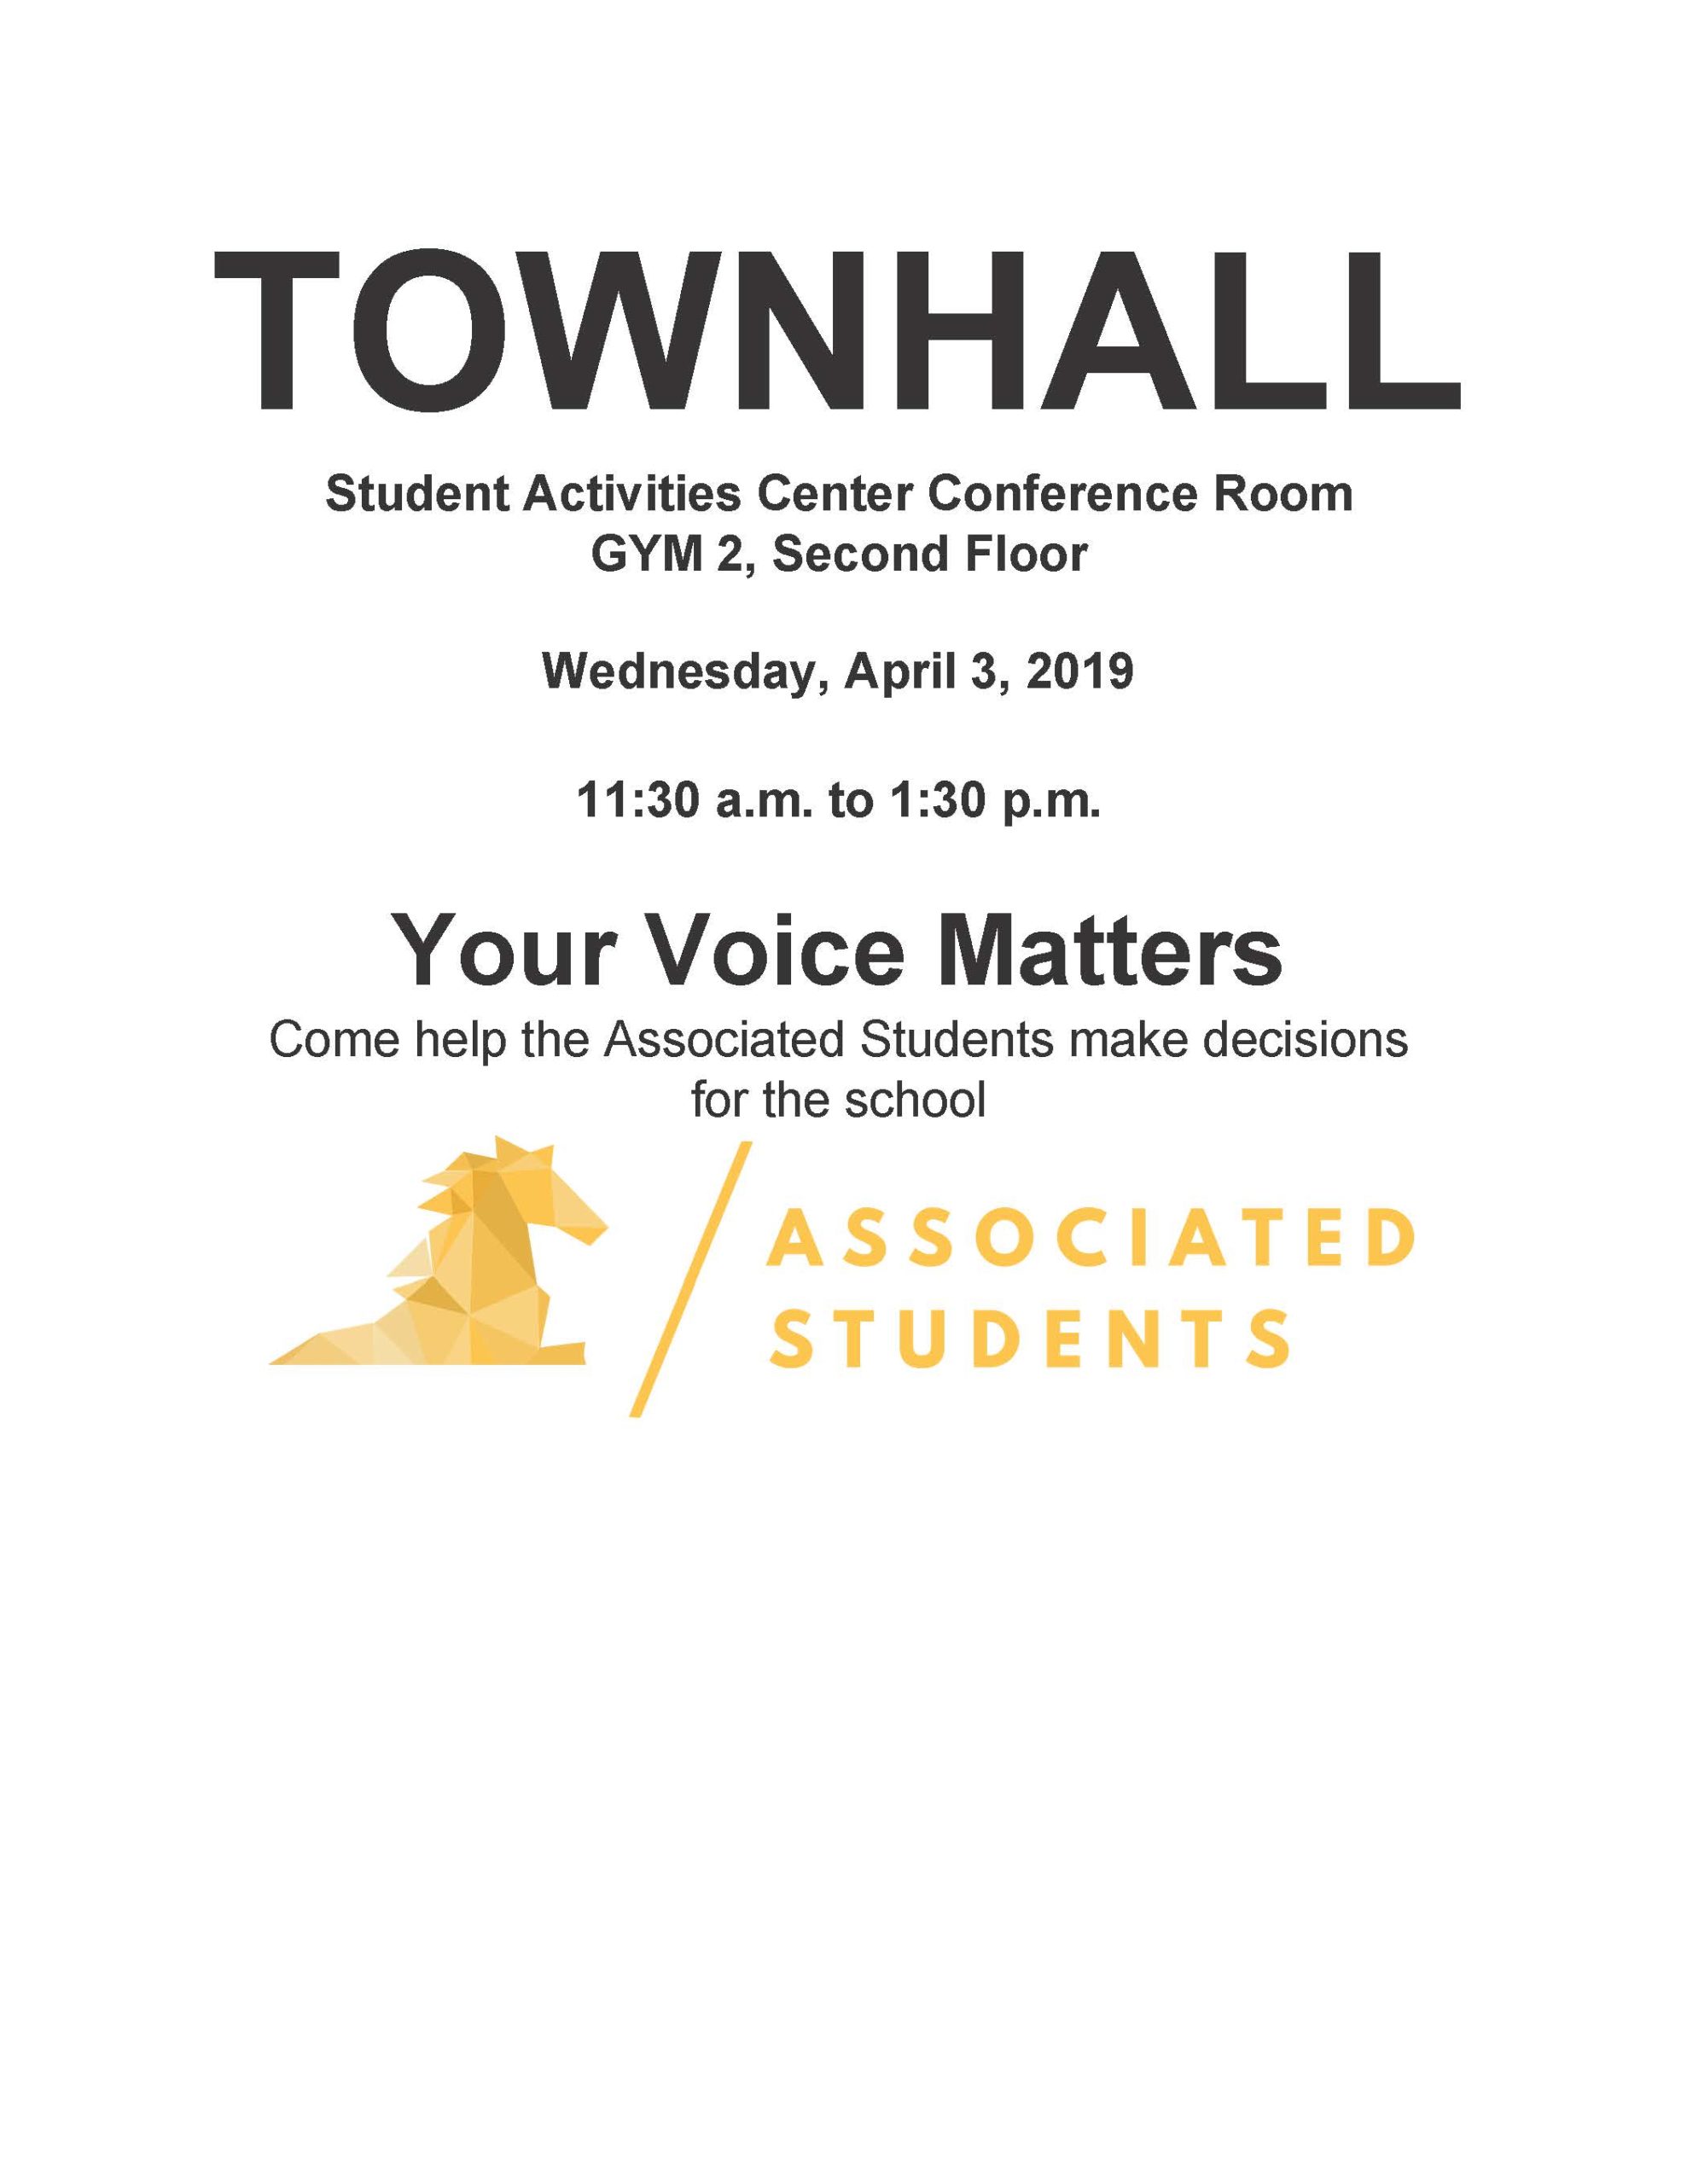 Townhall flyer